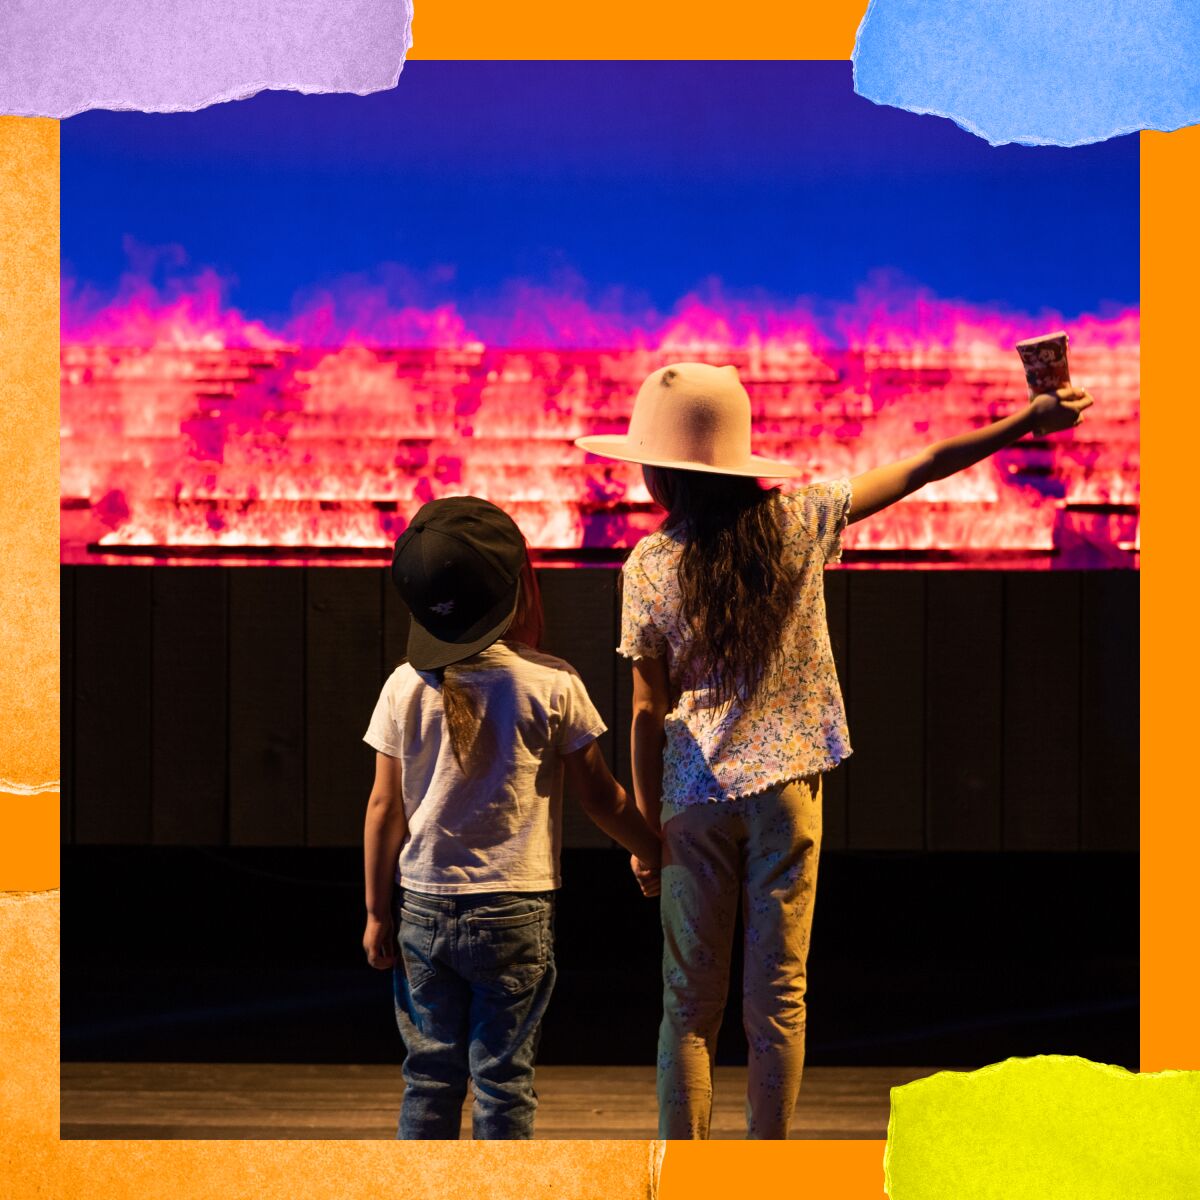 Two children in hats stand and hold hands in front of a glowing landscape.